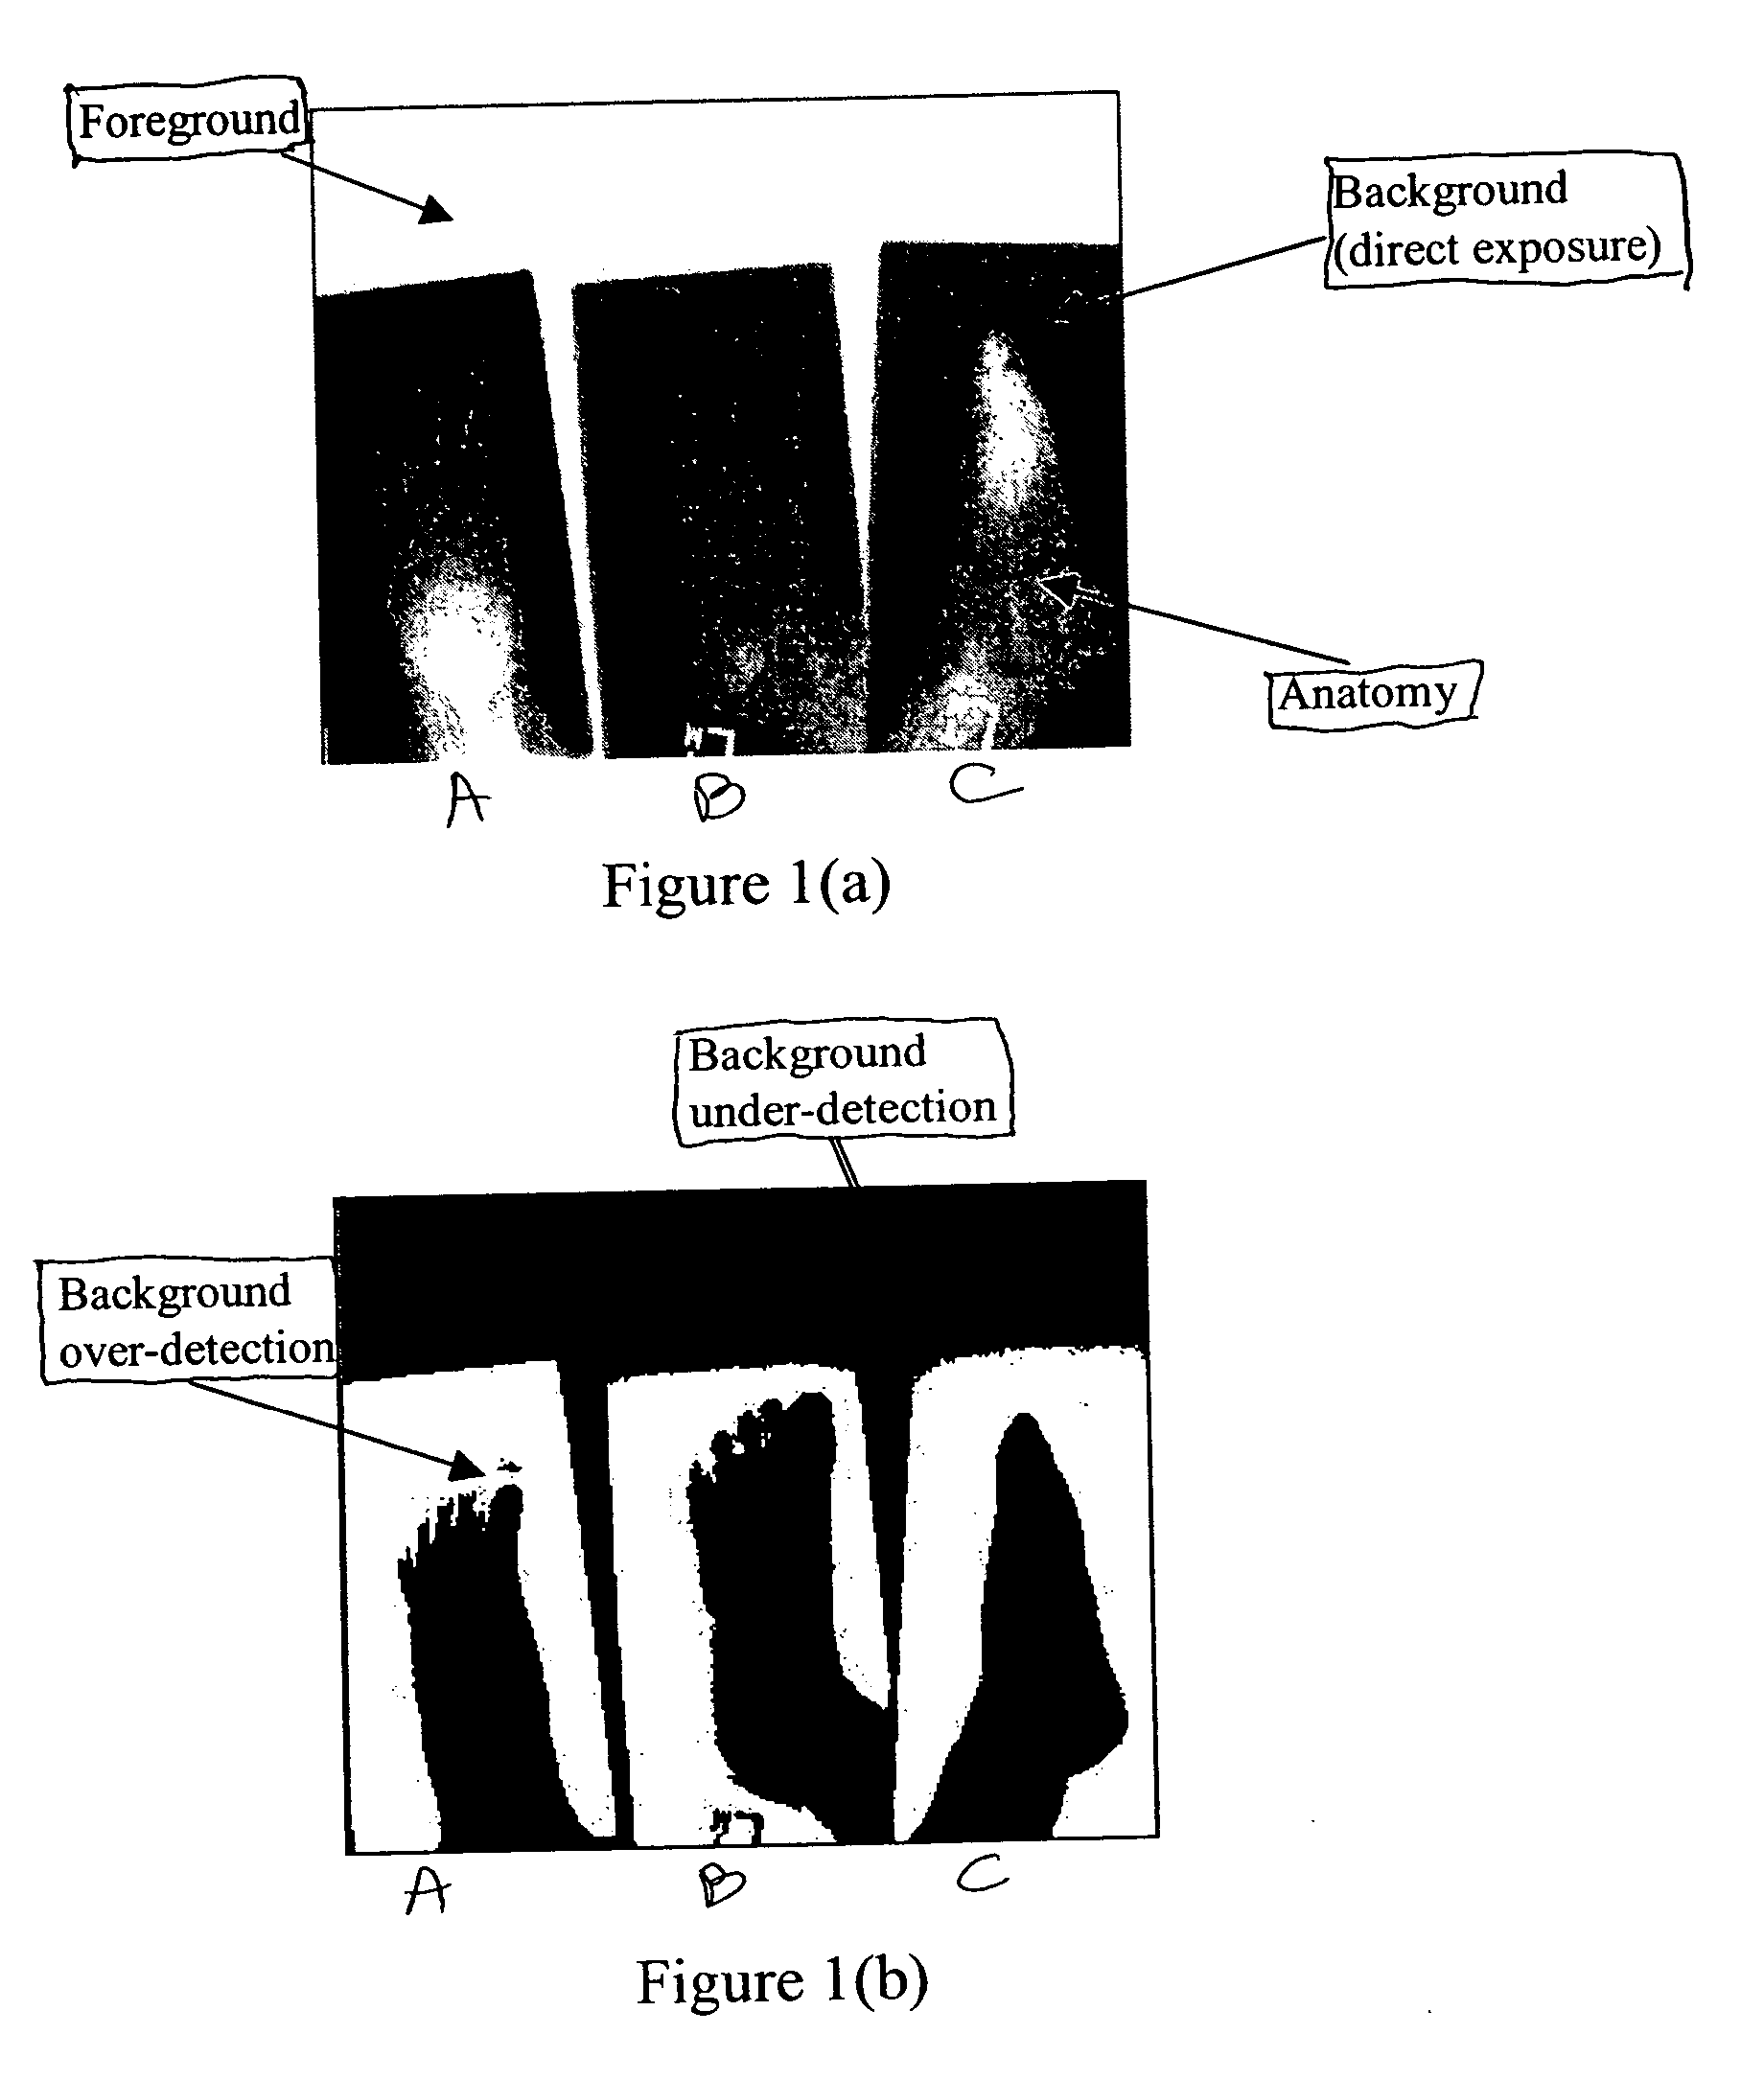 Method of segmenting a radiographic image into diagnostically relevant and diagnostically irrelevant regions